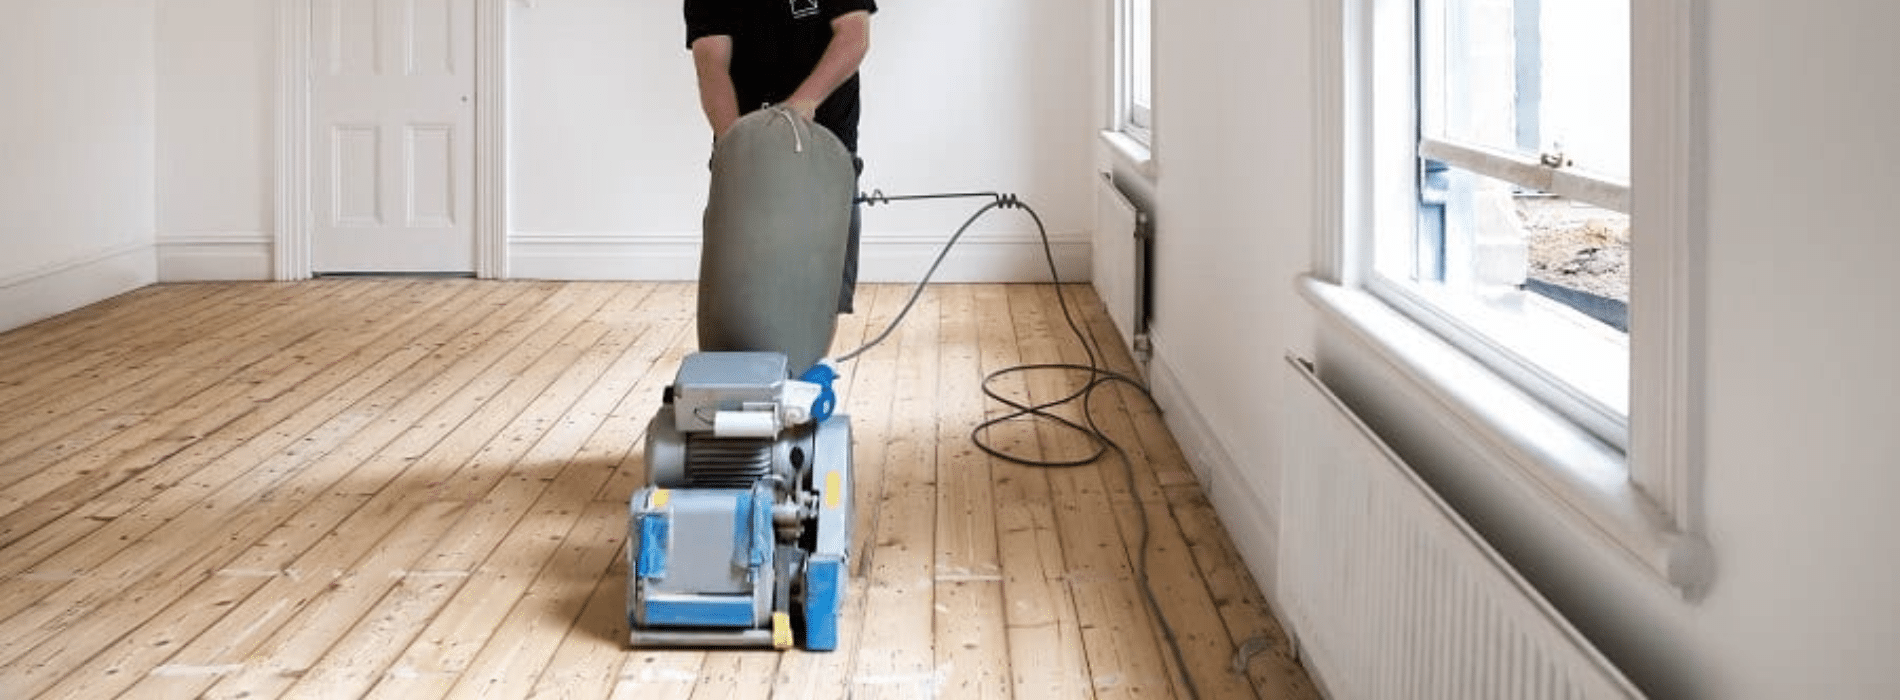 Floor sander in action, smoothing wooden surface for refinishing. Protective gear including goggles, mask, and ear muffs worn. The sander's powerful motor and rotating abrasive pad create a smooth, even finish. Fine dust particles visible in the air. Preparation and precision are key to achieving professional results.